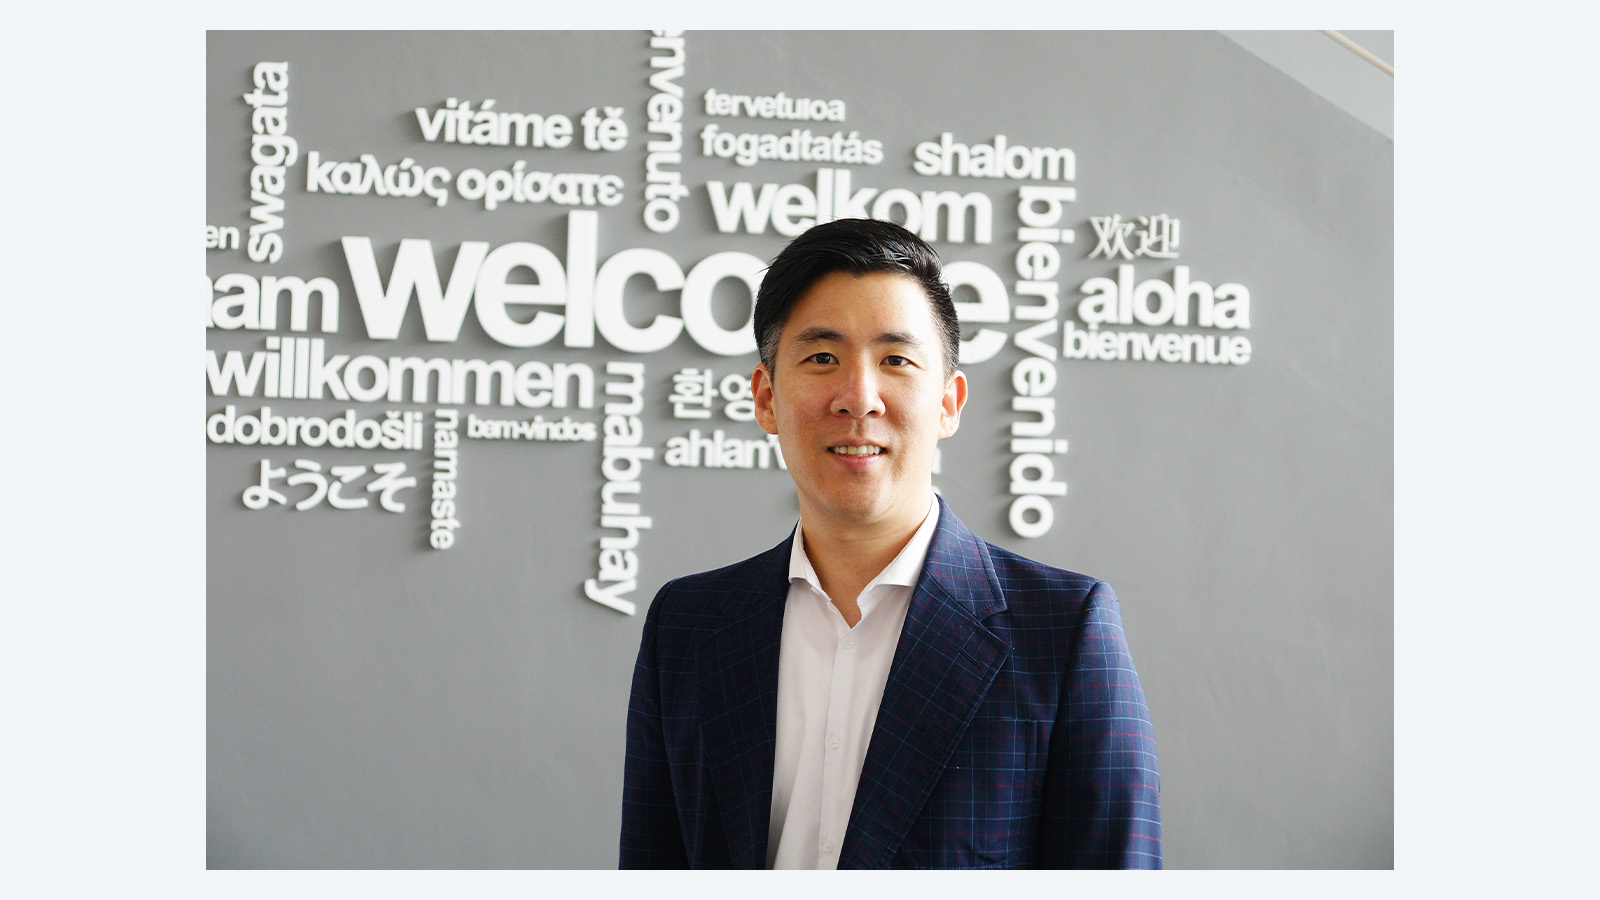 Ouyang promoted to VP, will lead idX